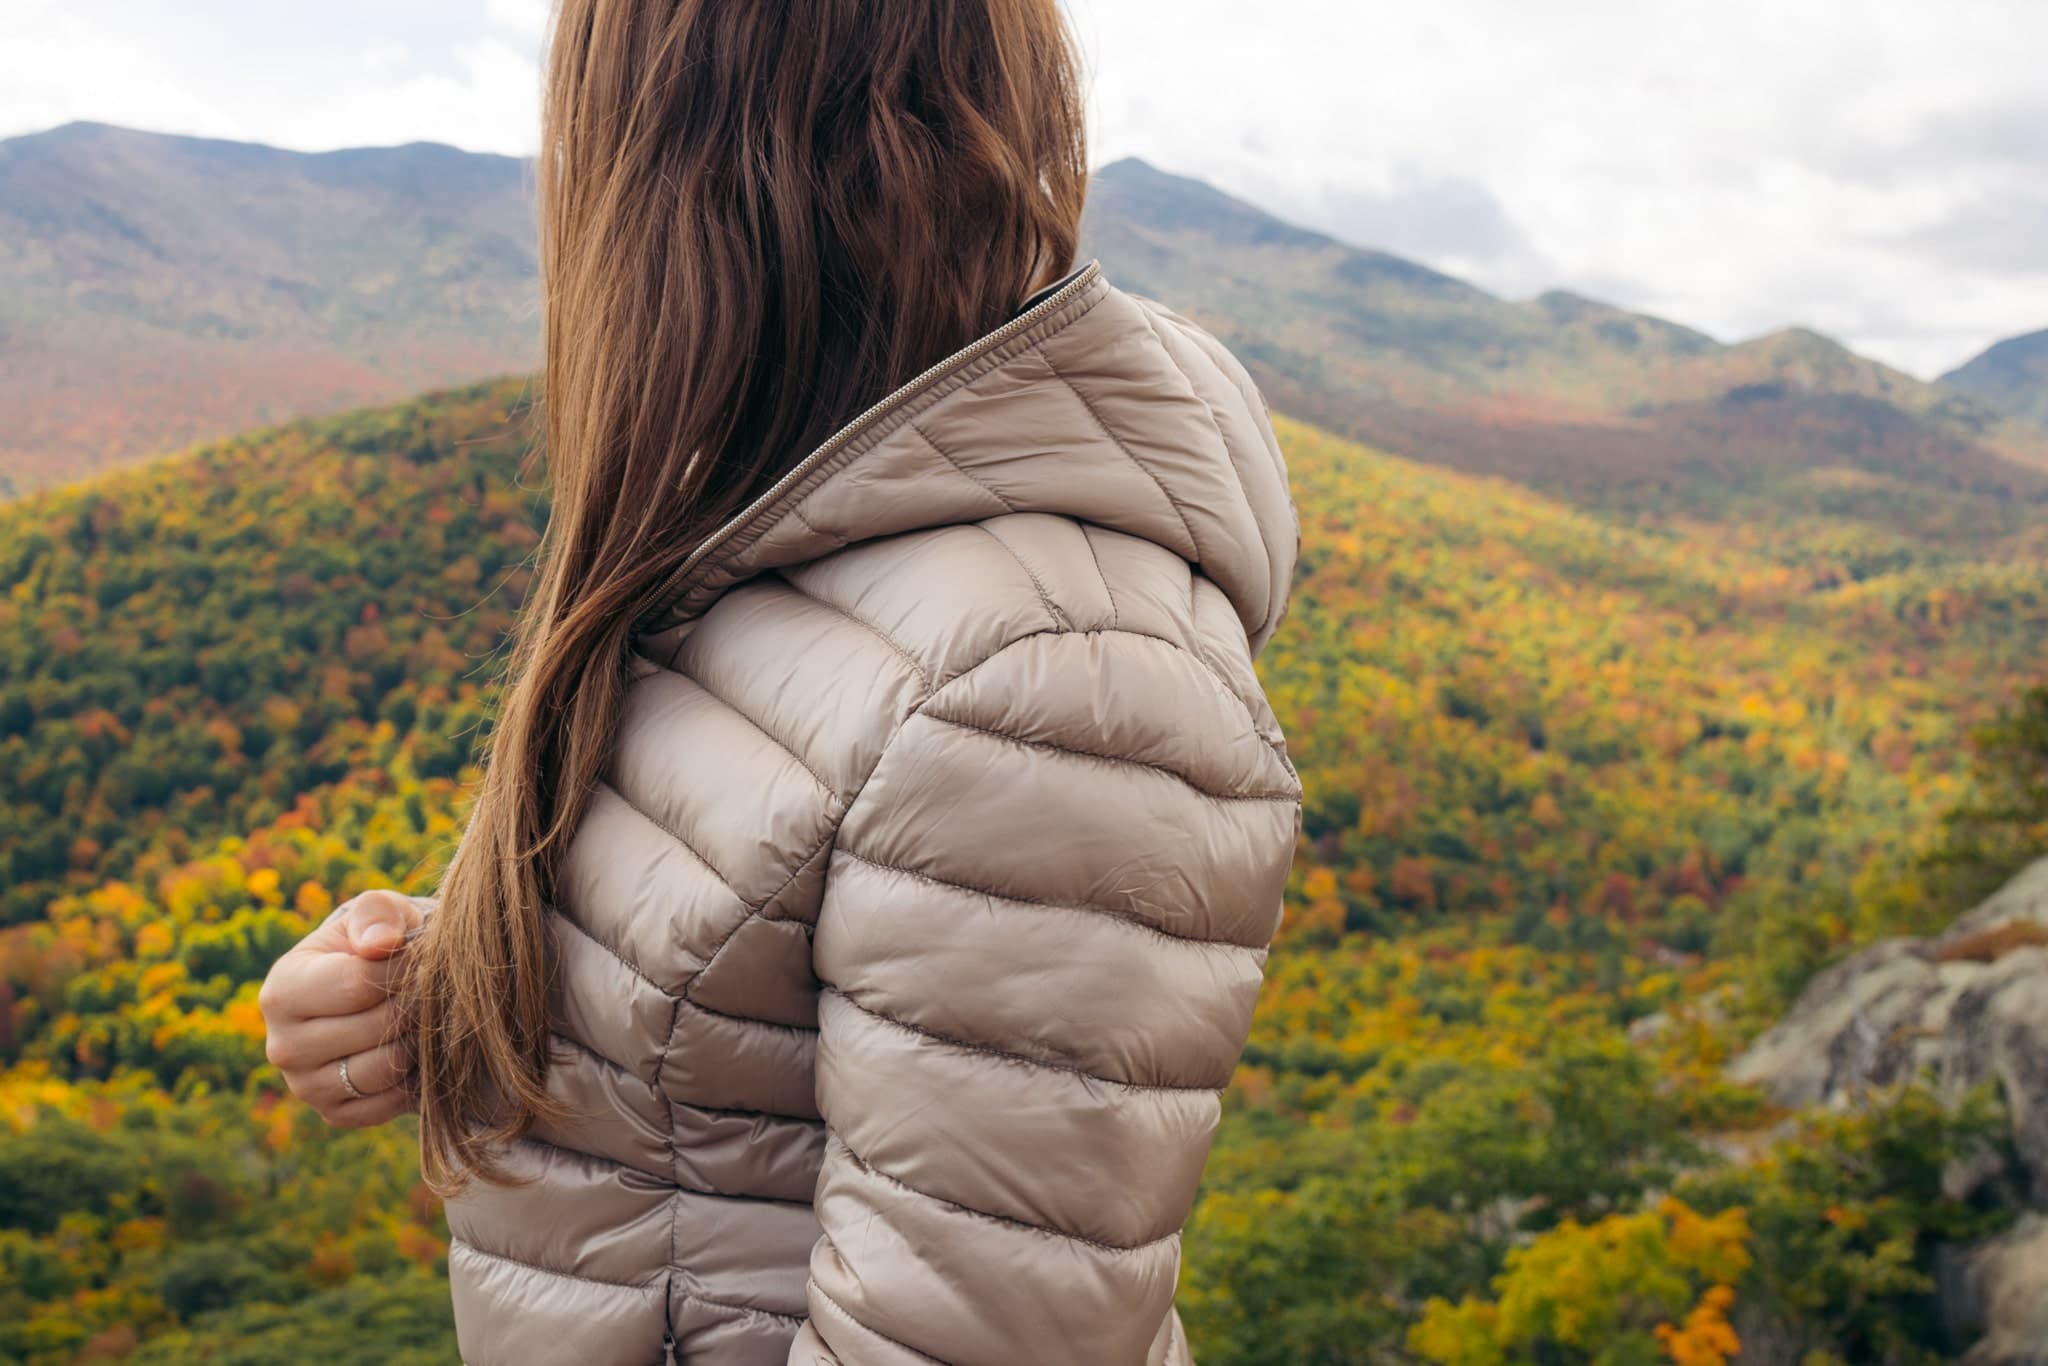 Hiker wearing a warm jacket that packs up small for a day hike in the Adirondack Mountains